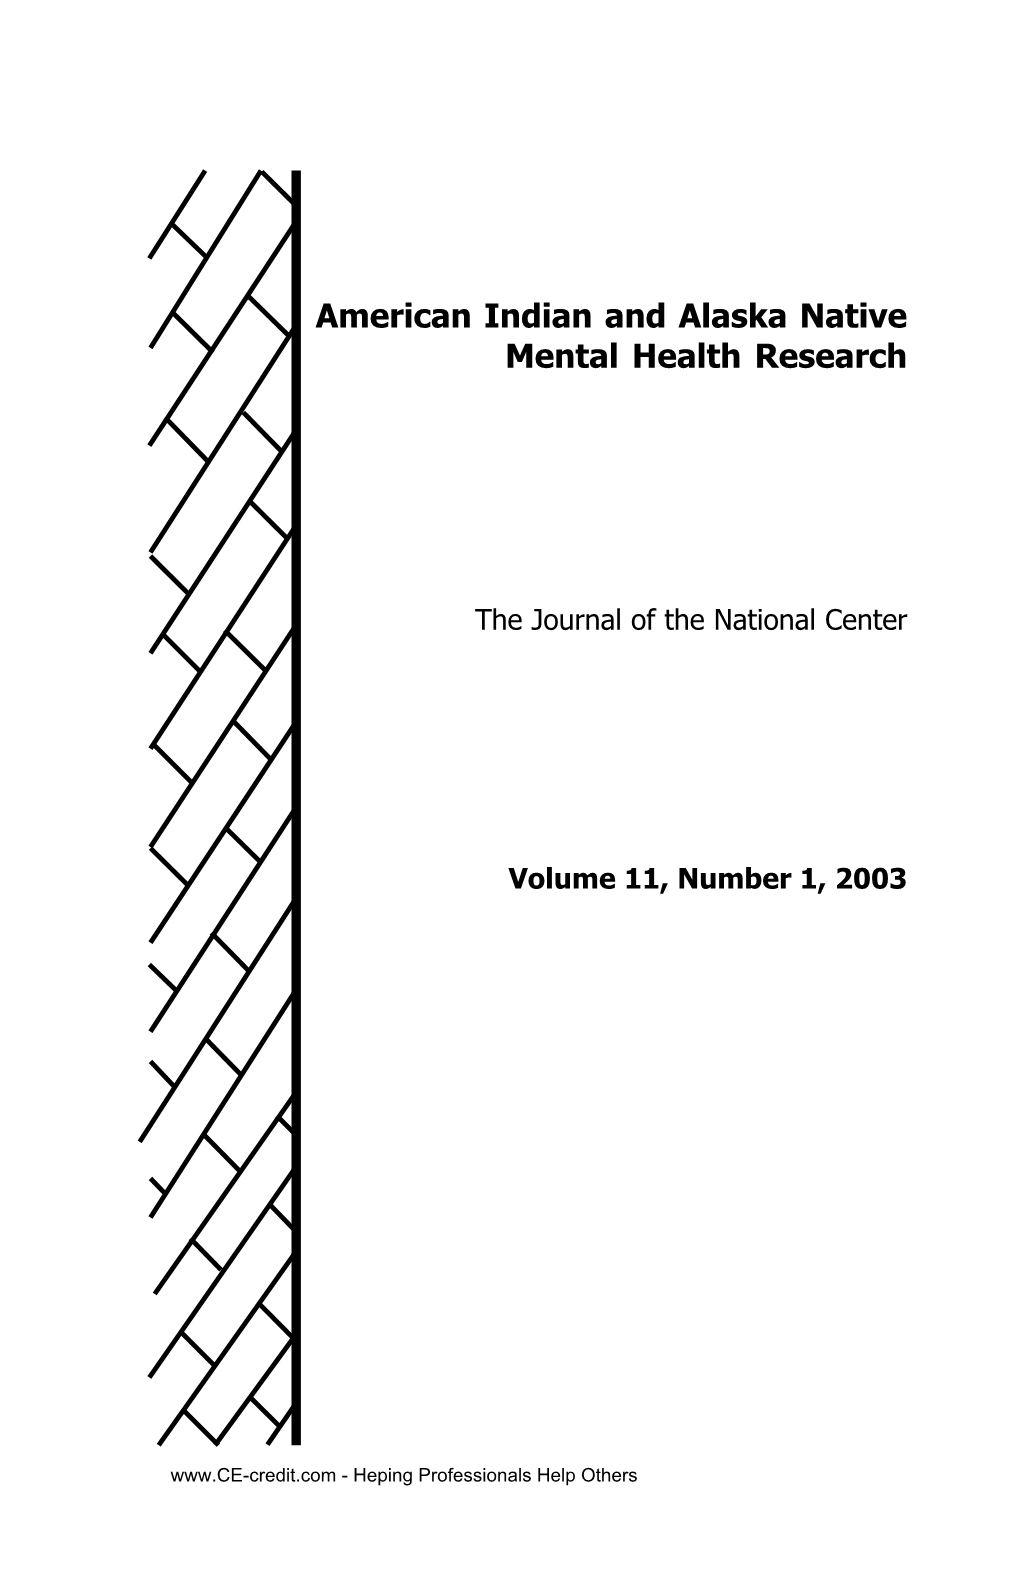 American Indian and Alaska Native Mental Health Research